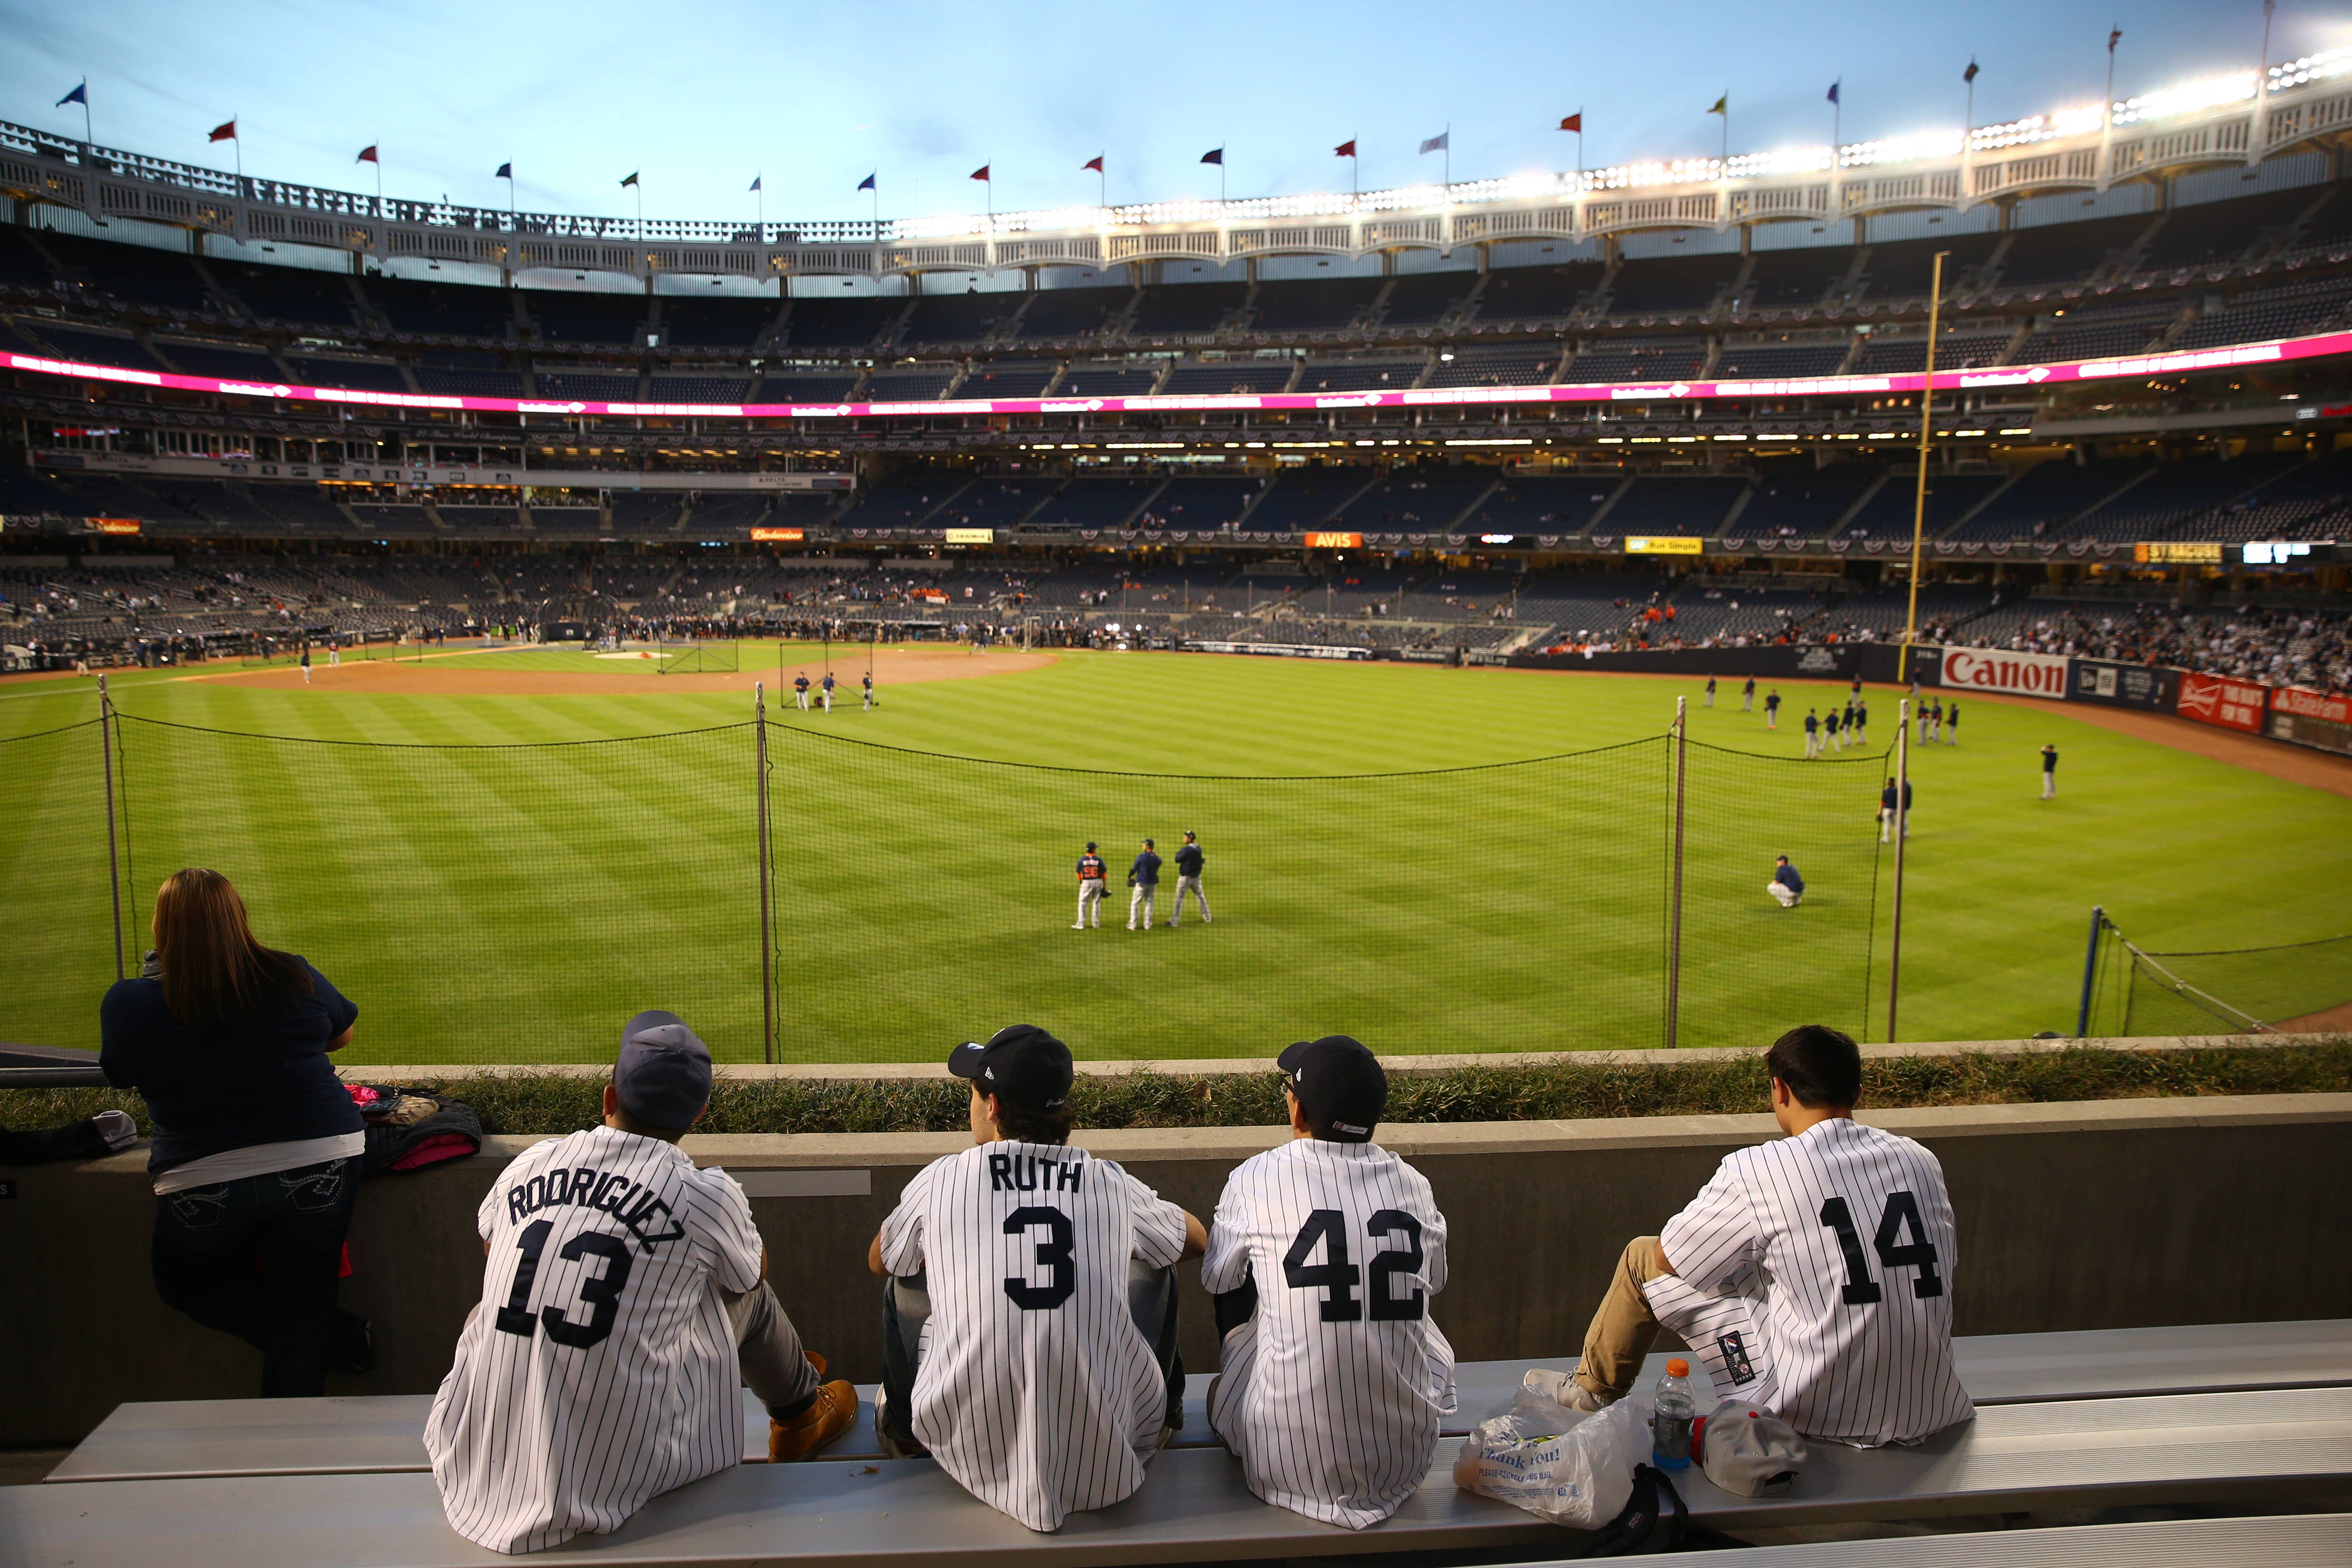 For Some Fans, a Last Swing by the Old Yankee Stadium - The New